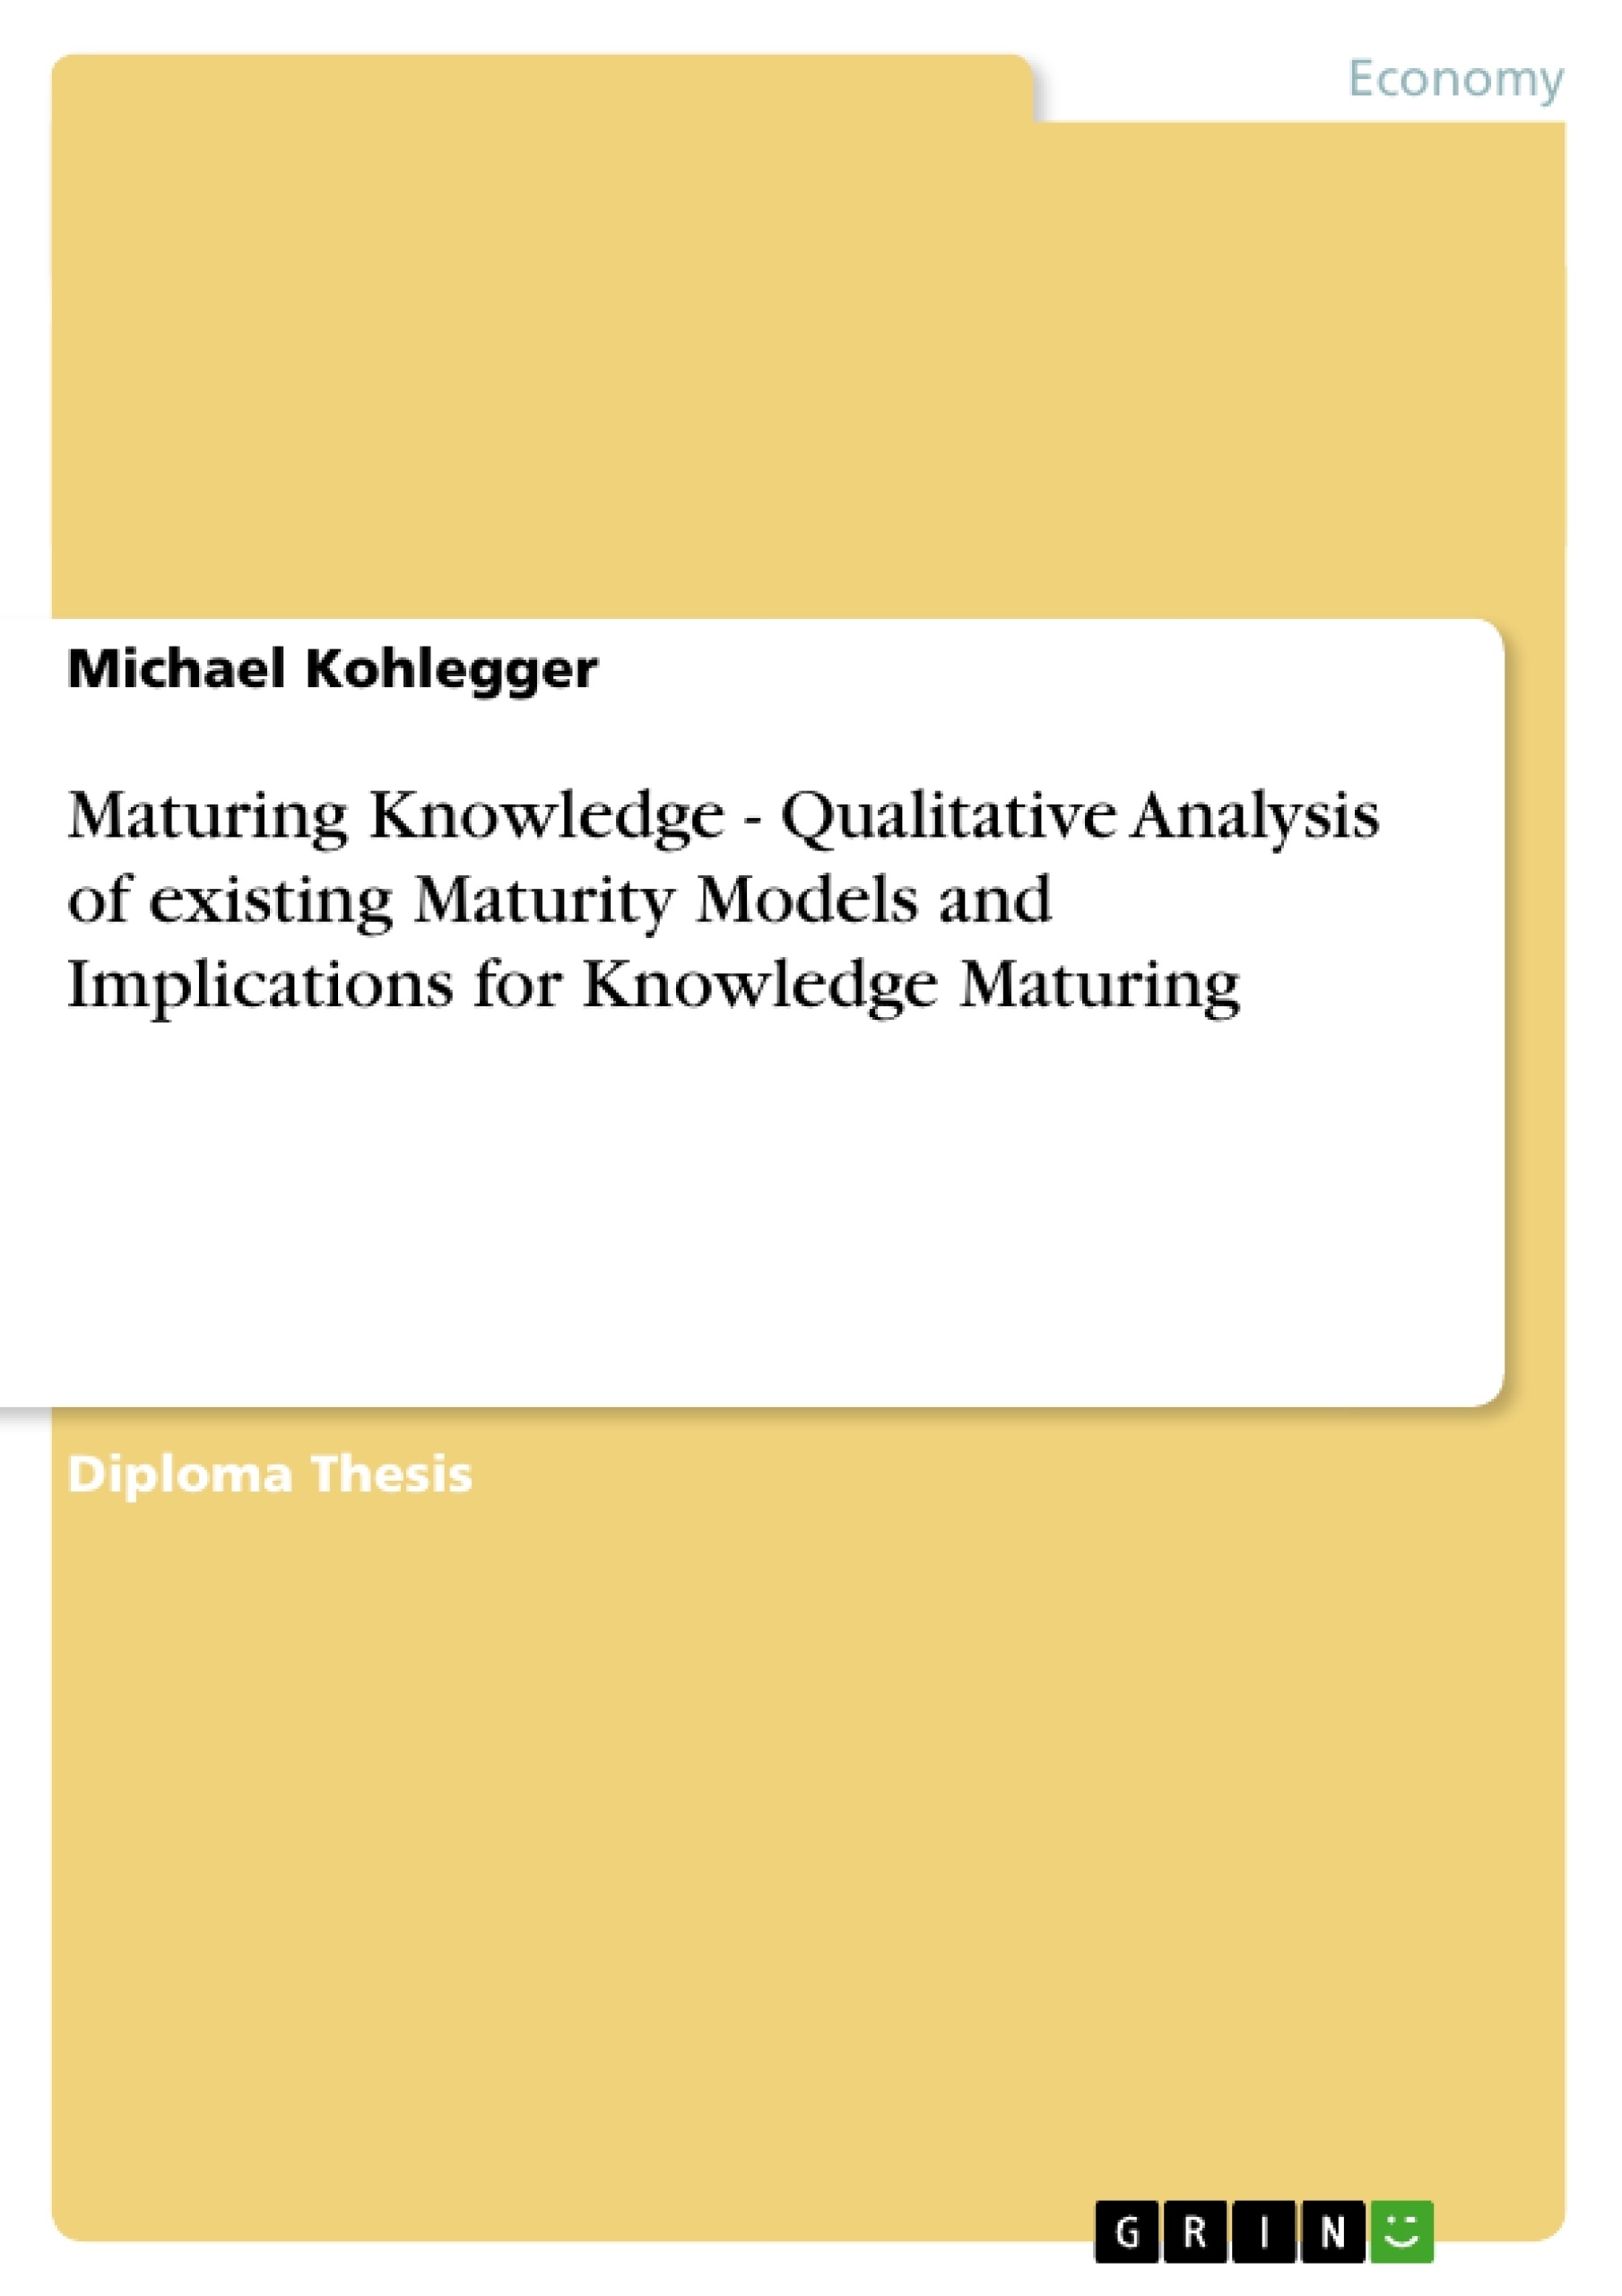 Title: Maturing Knowledge - Qualitative Analysis of existing Maturity Models and Implications for Knowledge Maturing